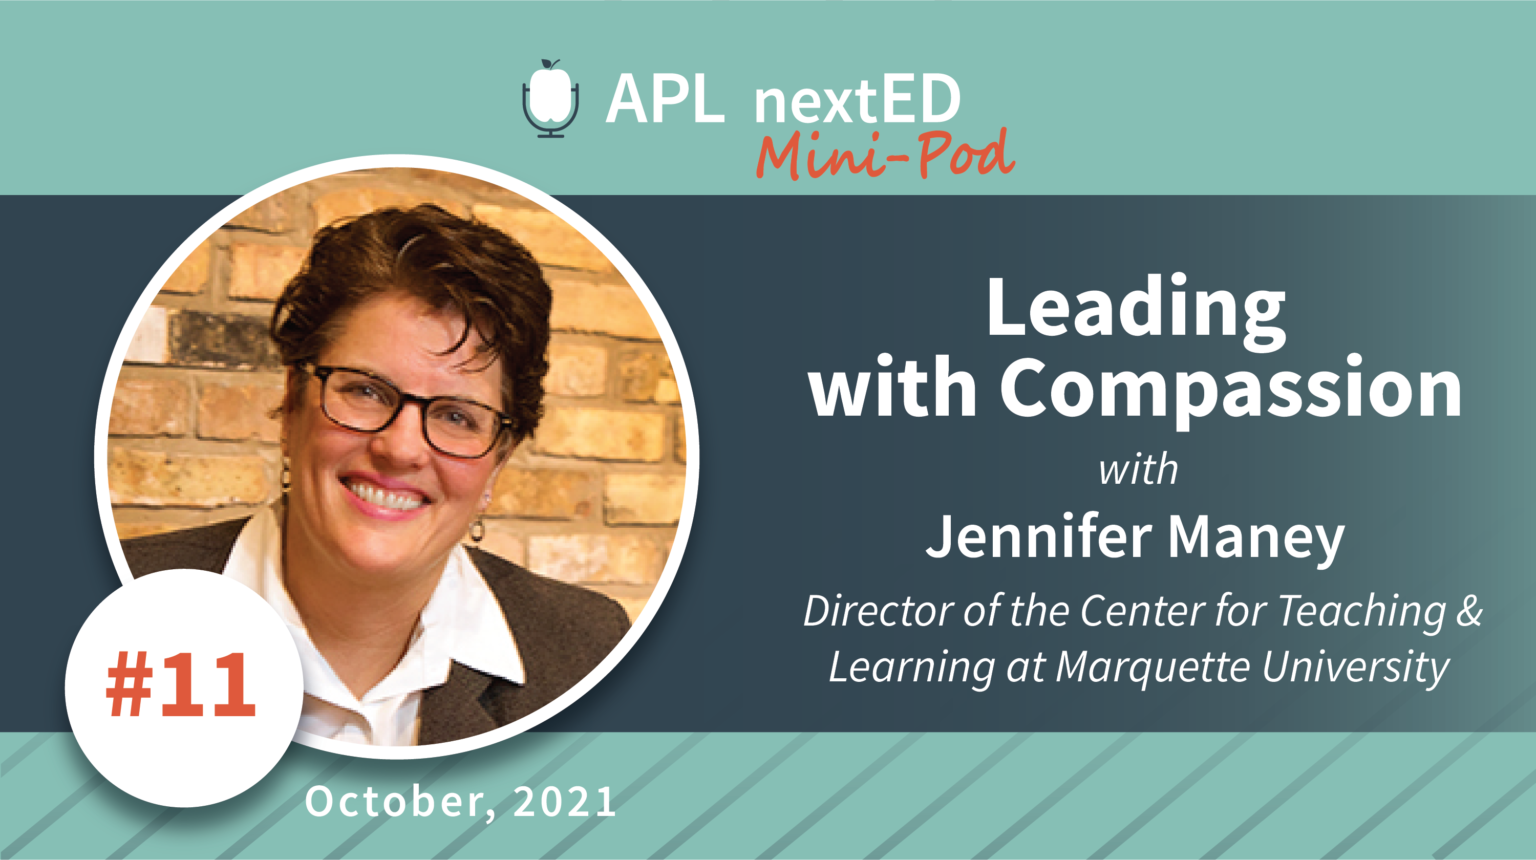 APL nextED Mini-Pod Episode 11: Leading with Compassion with Dr. Jennifer Maney